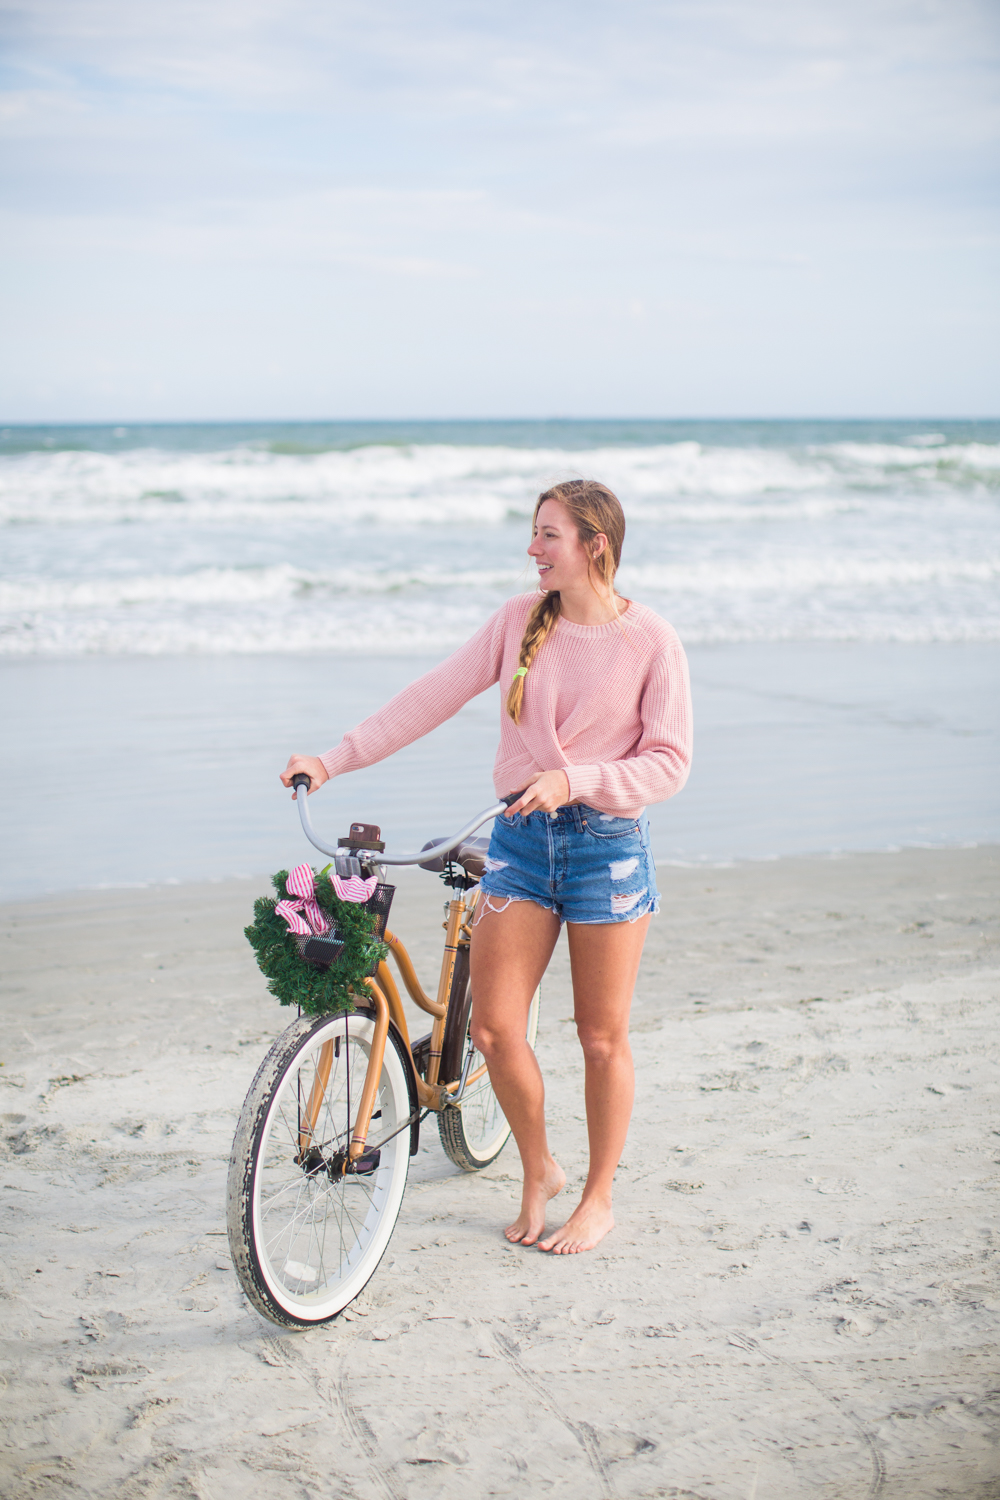 Sweaters to Wear During the Holiday Season | Beach Bike Ride | Winter Outfit Ideas | Christmas in Florida | Beach Bike Ride | Cropped Pink Sweater | Twisted Back Sweater | Winter Sweater Outfit